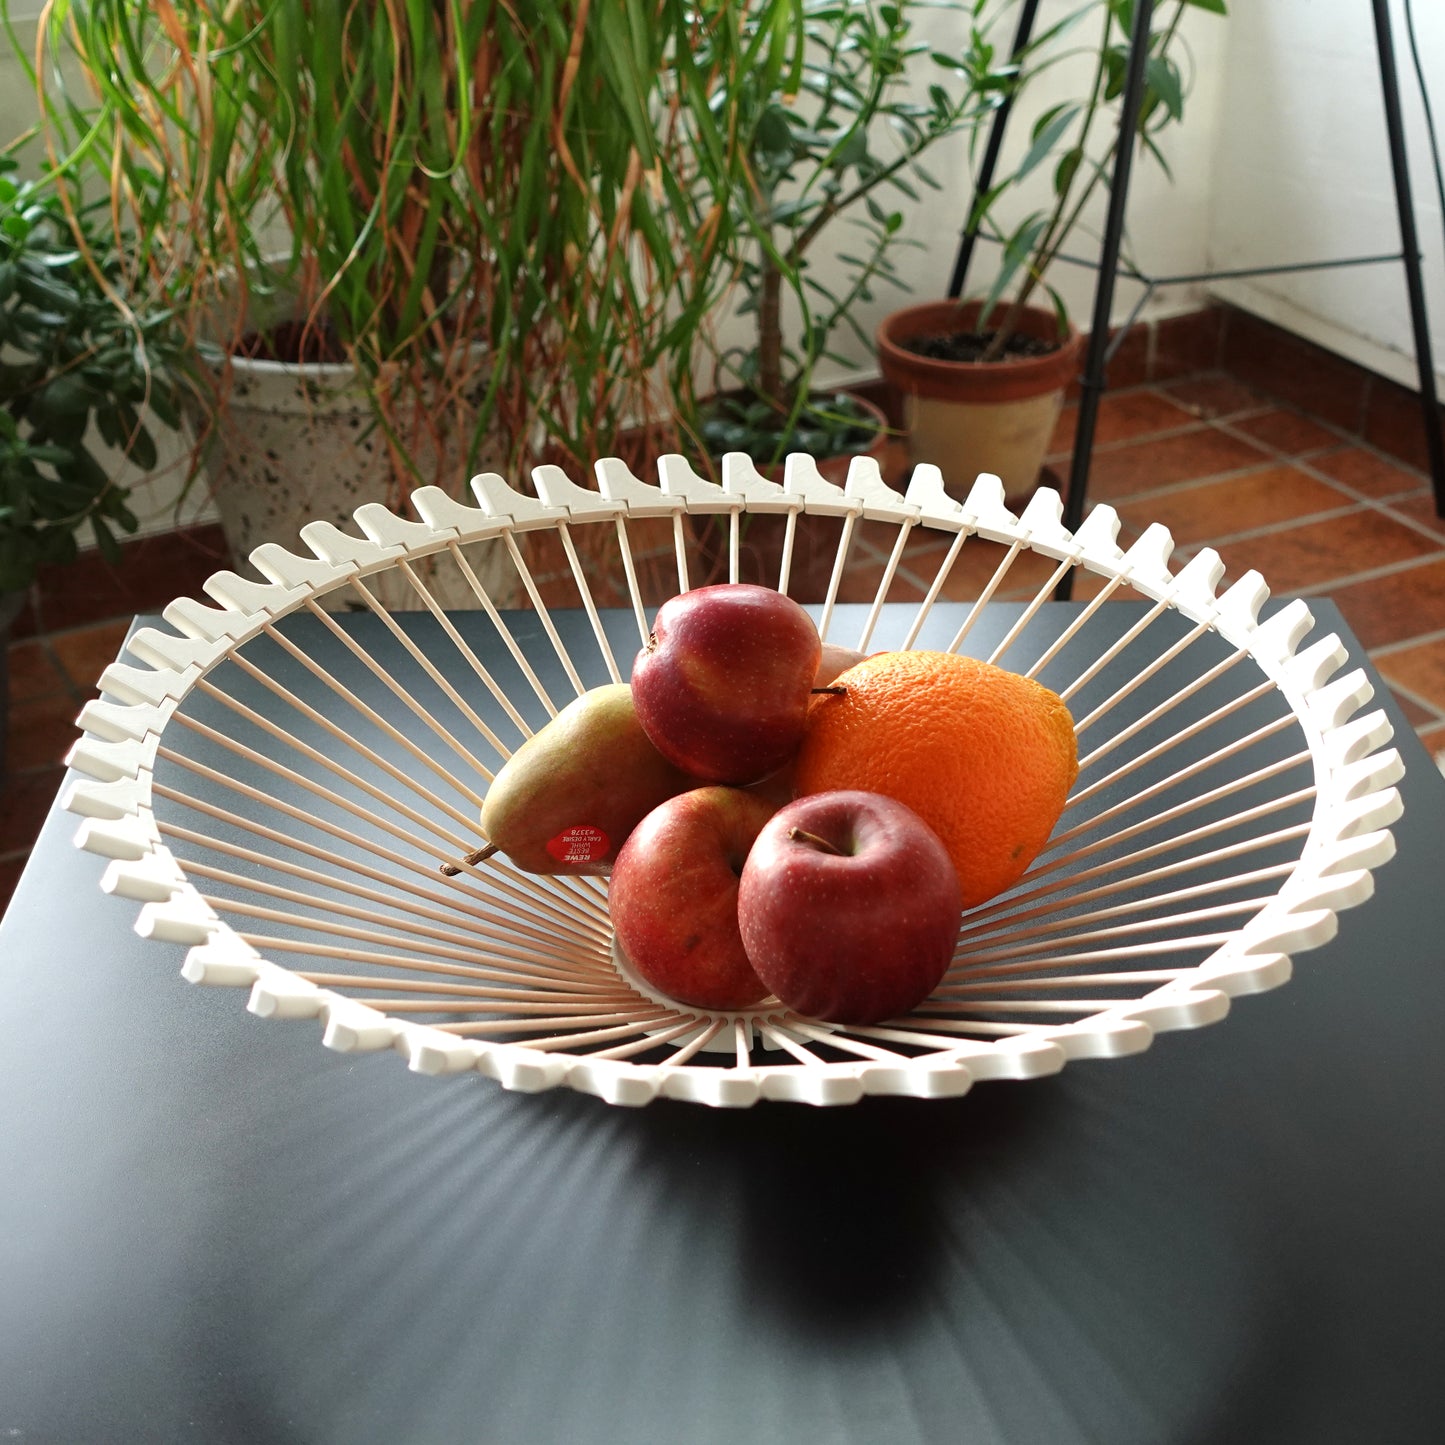 DESIGNER SUN FRUIT BOWL TABLEWARE KITCHEN AND DINING GIFTS HOUSE WARMING